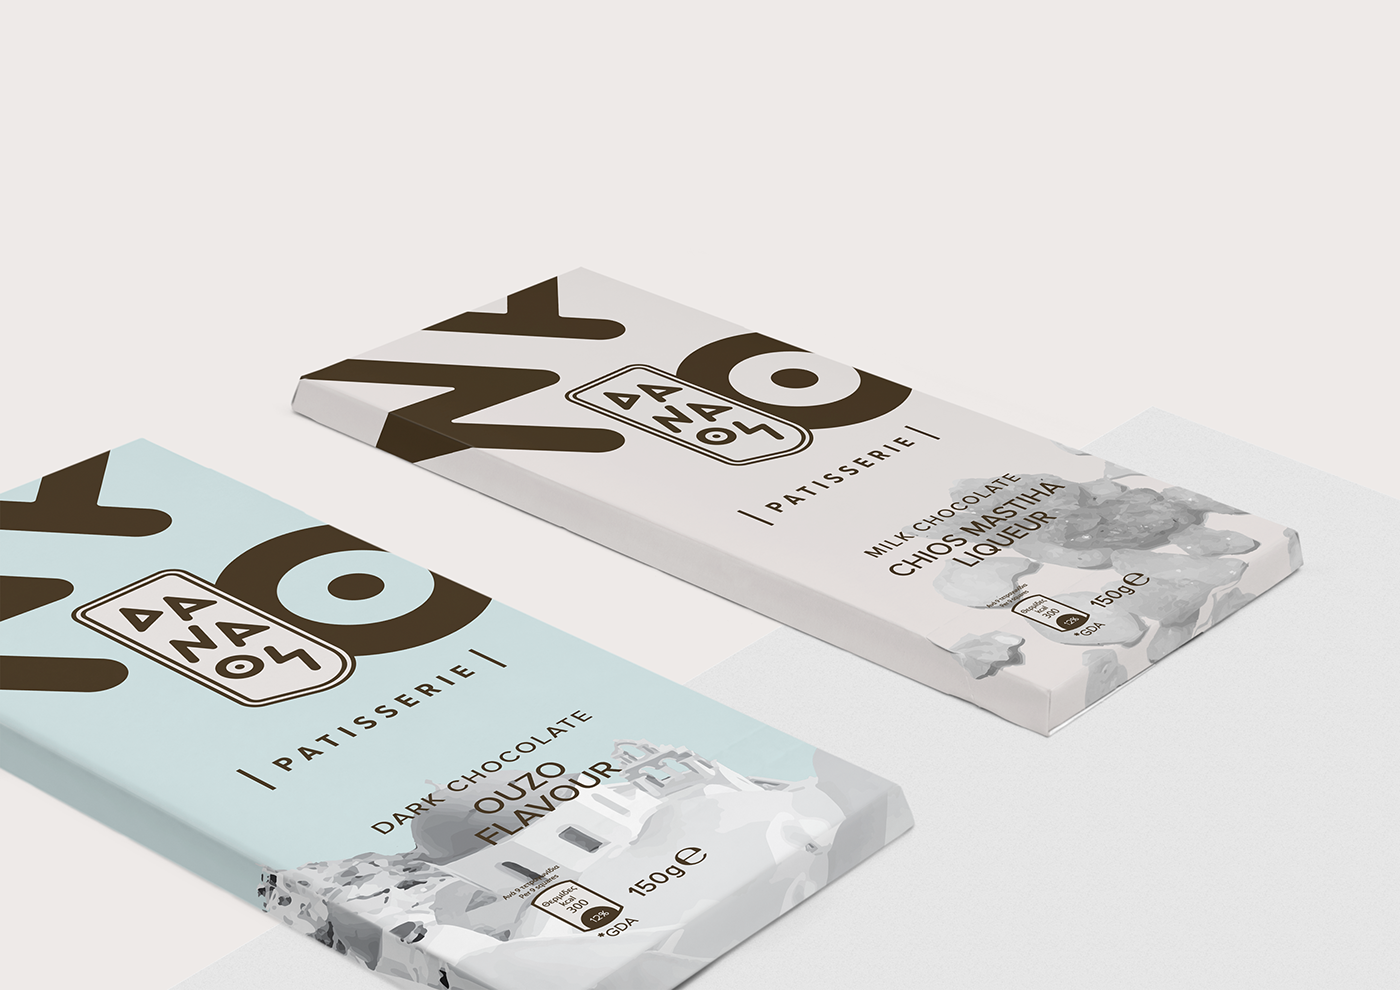 brand identity Patisserie for sale Greece Greek design ancient greece Sweets chocolate chocolates Packaging